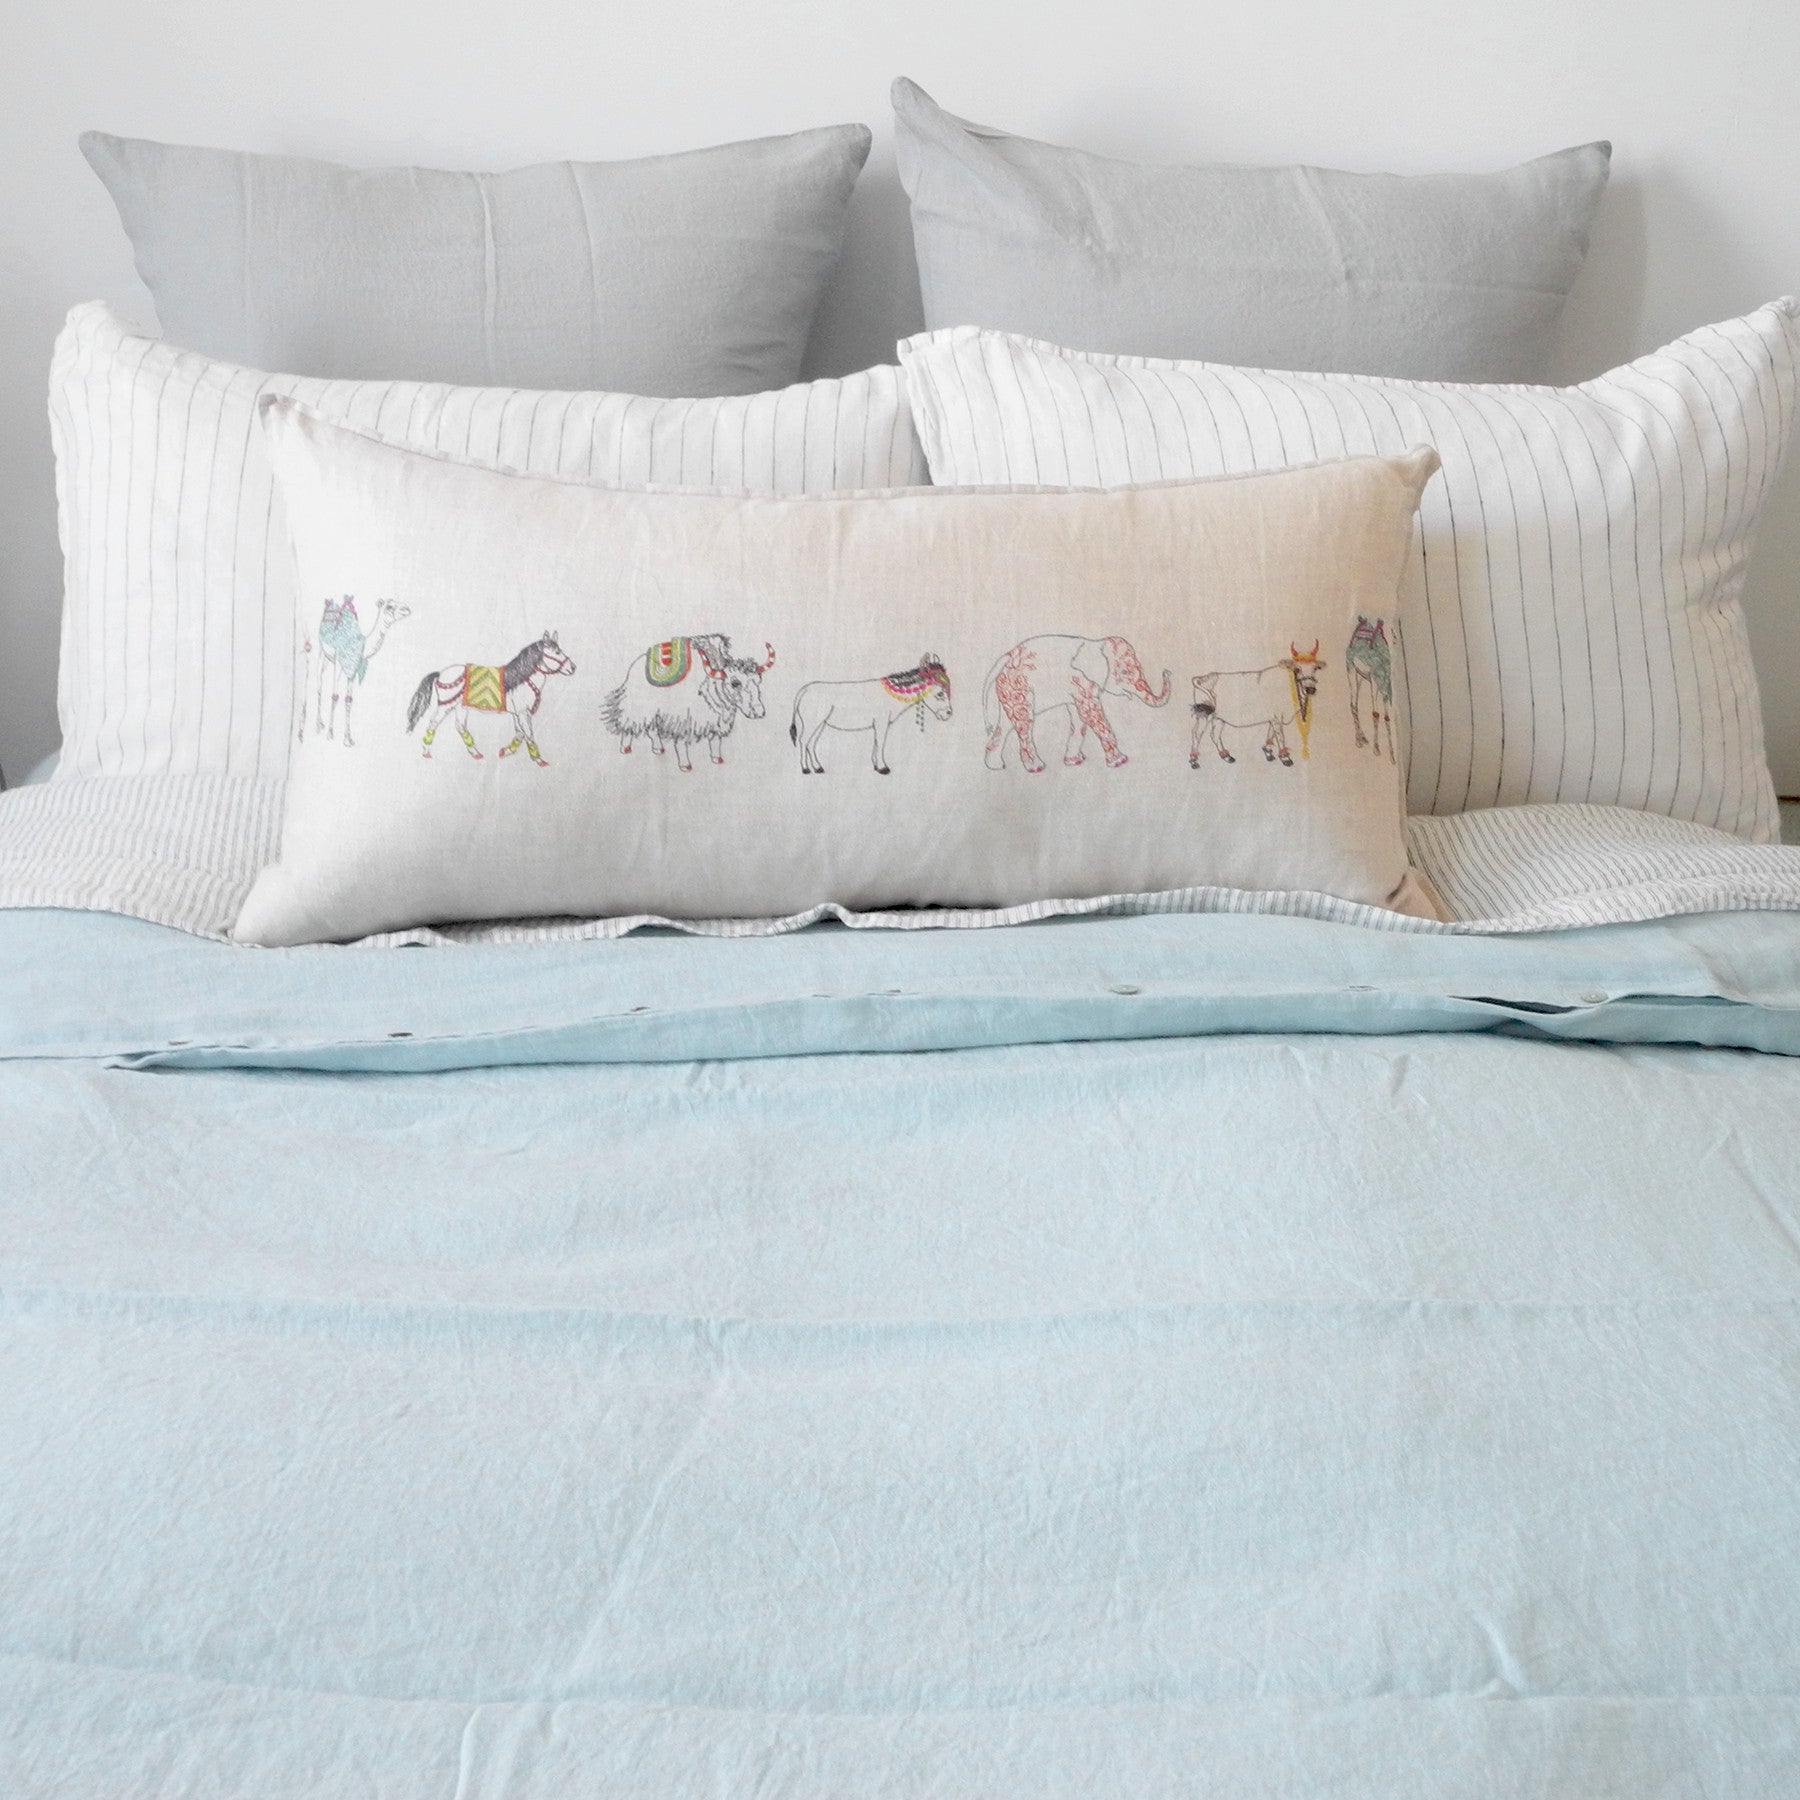 Linge Particulier Cloud Grey Euro Linen Pillowcase Sham with a pale blue linen duvet and Coral & Tusk pillow for a colorful linen bedding look in light grey - Collyer's Mansion